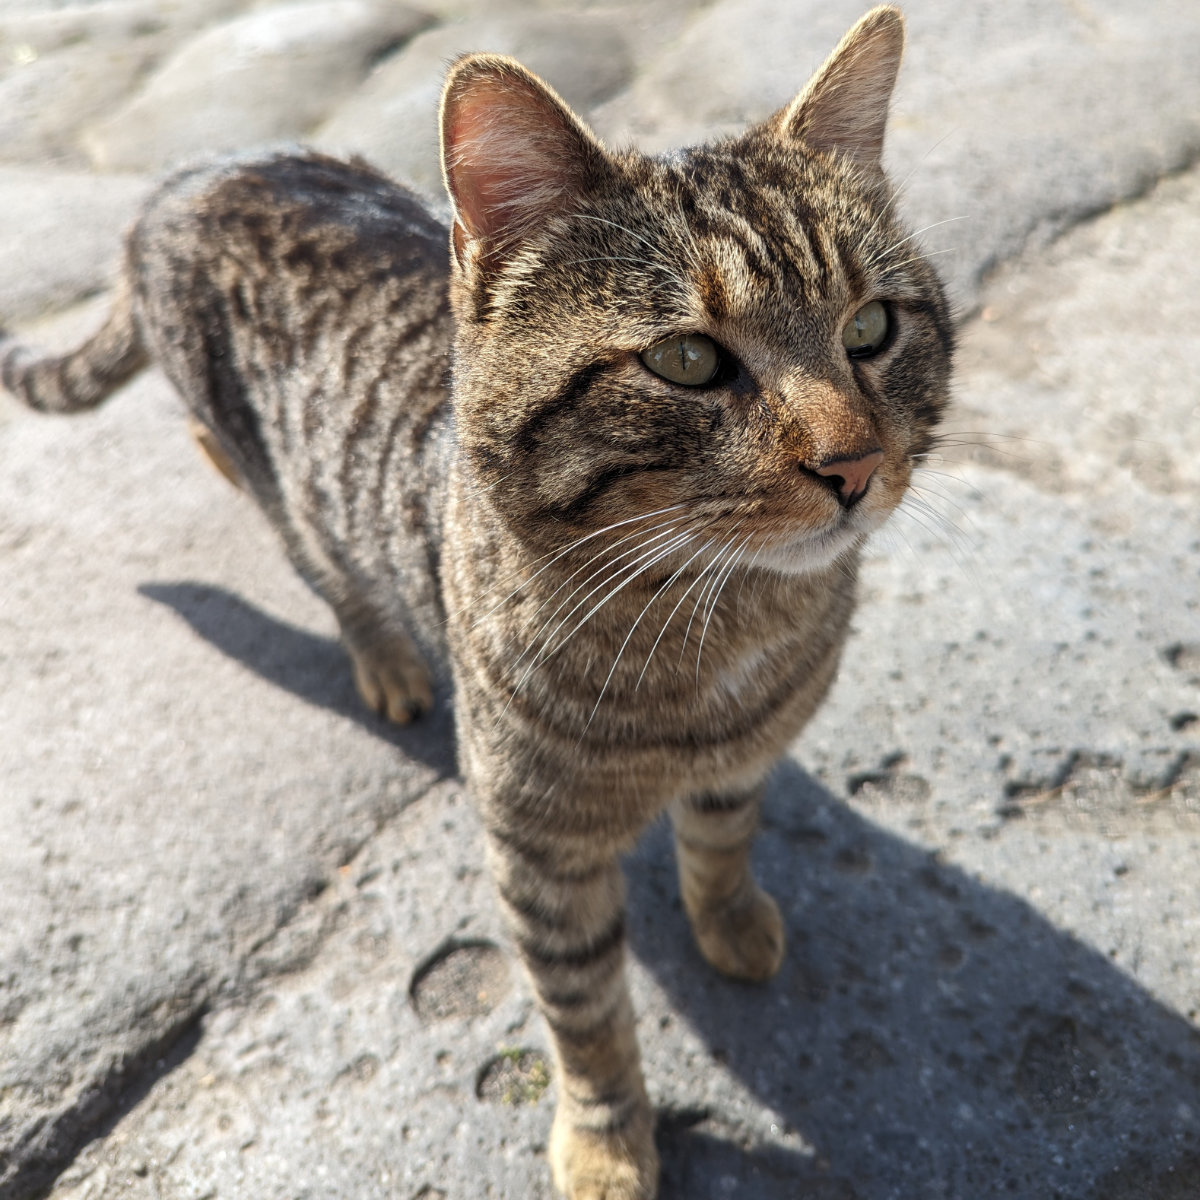 One of the cats who have taken up residence outside the café